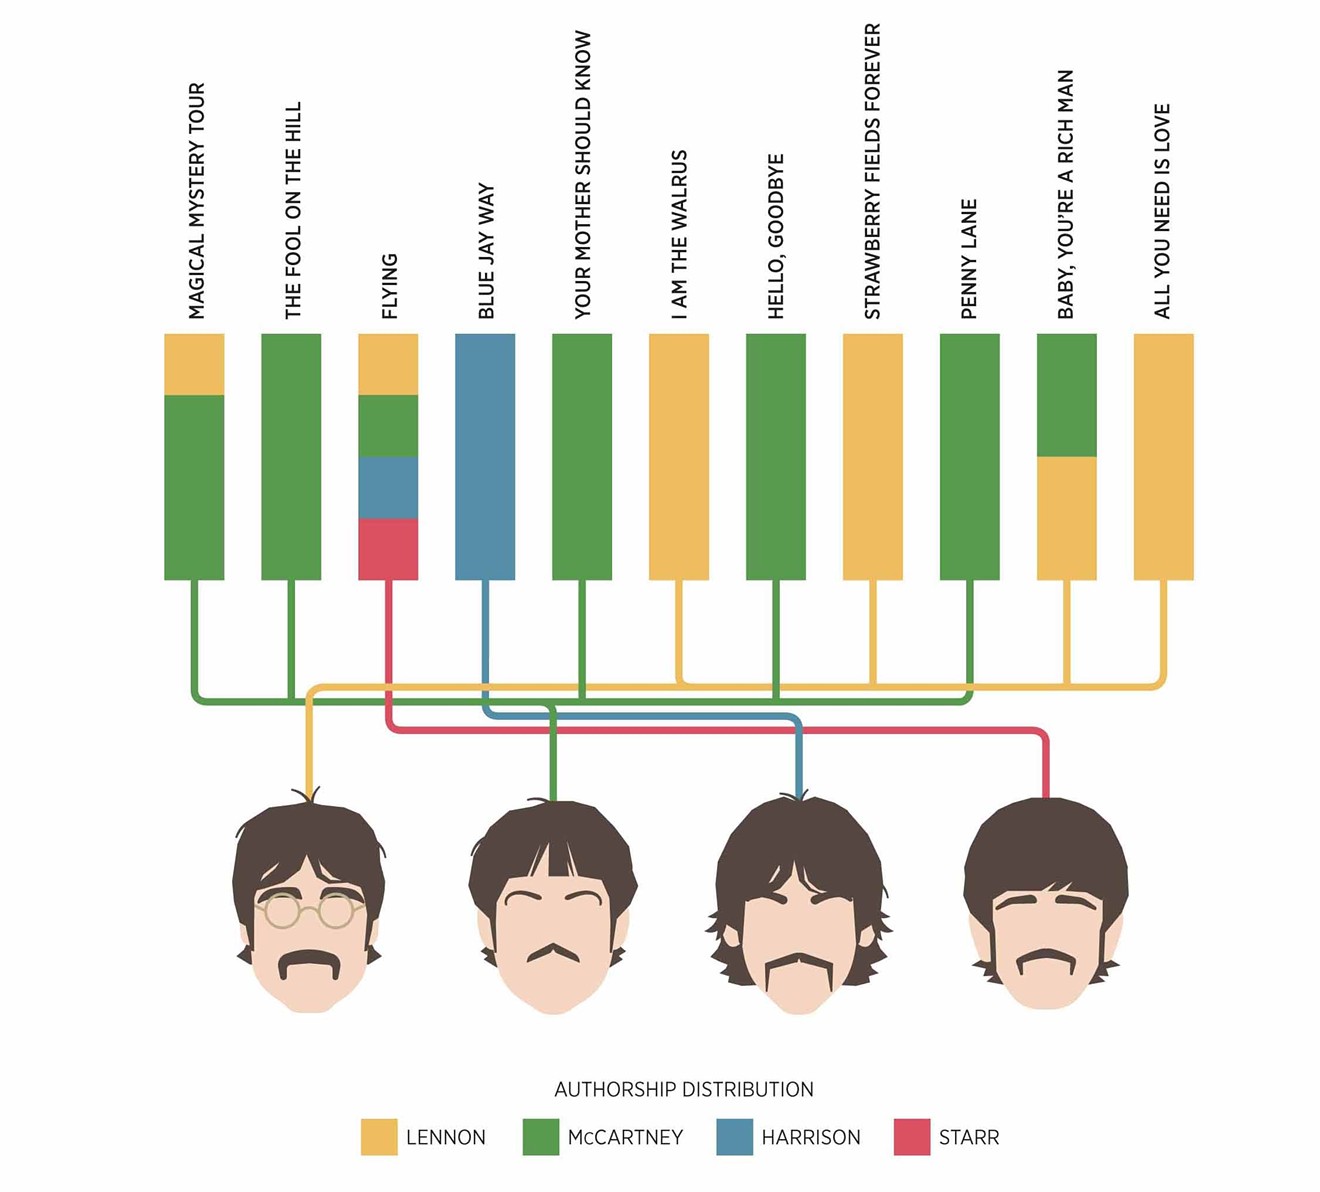 "Visualizing the Beatles" breaks down which member wrote what percentage of each and every song they release on albums.